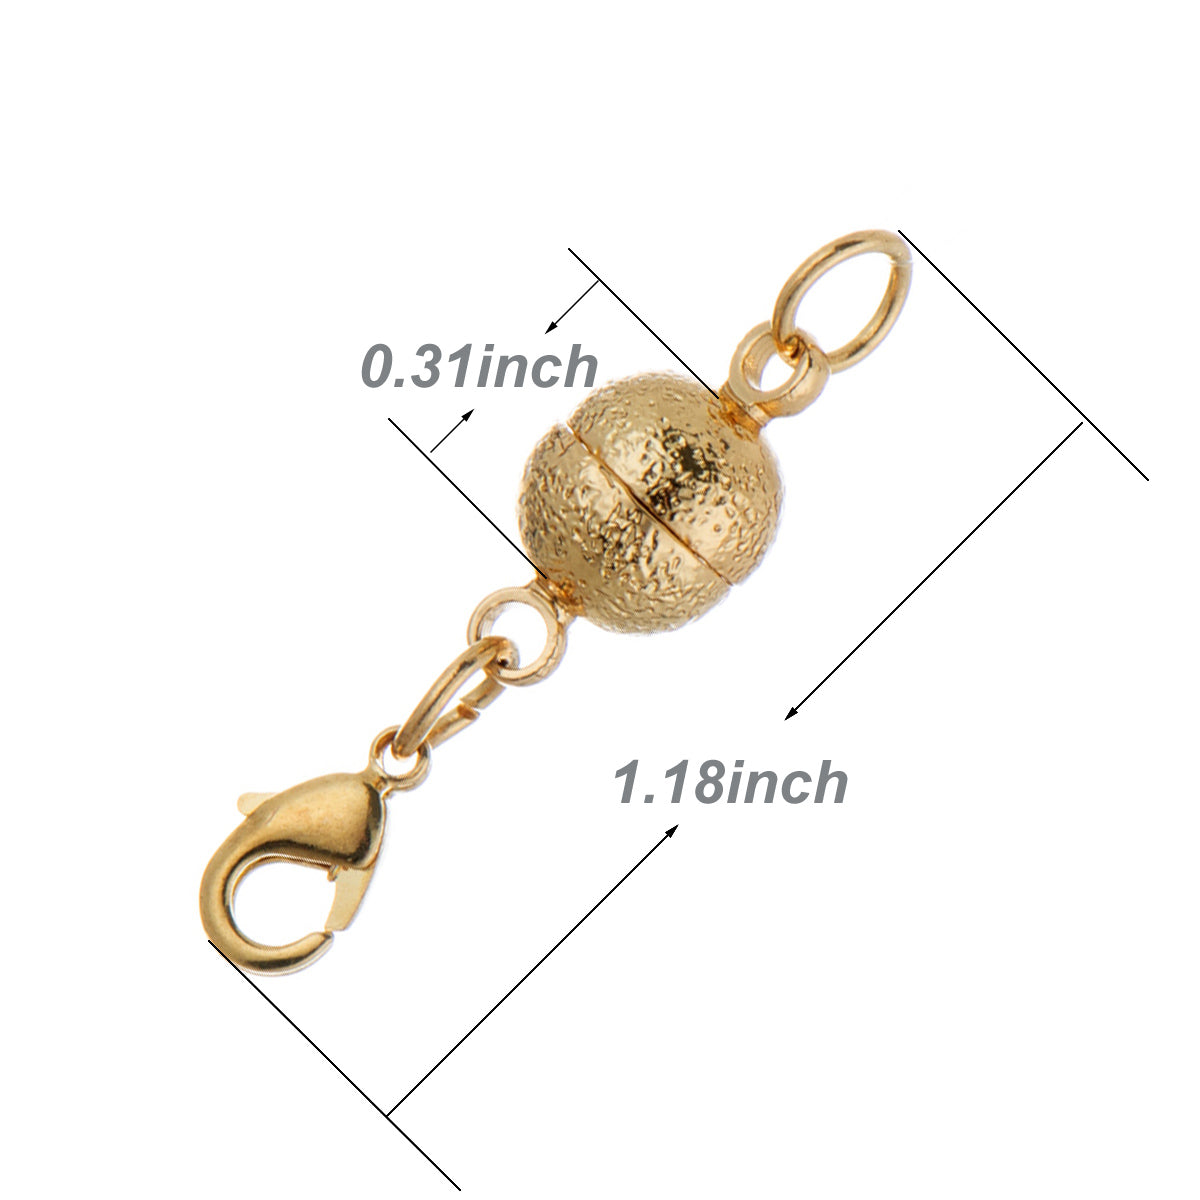 Round Ball Design Strong Magnetic Jewelry Clasp for Necklace Bracelet